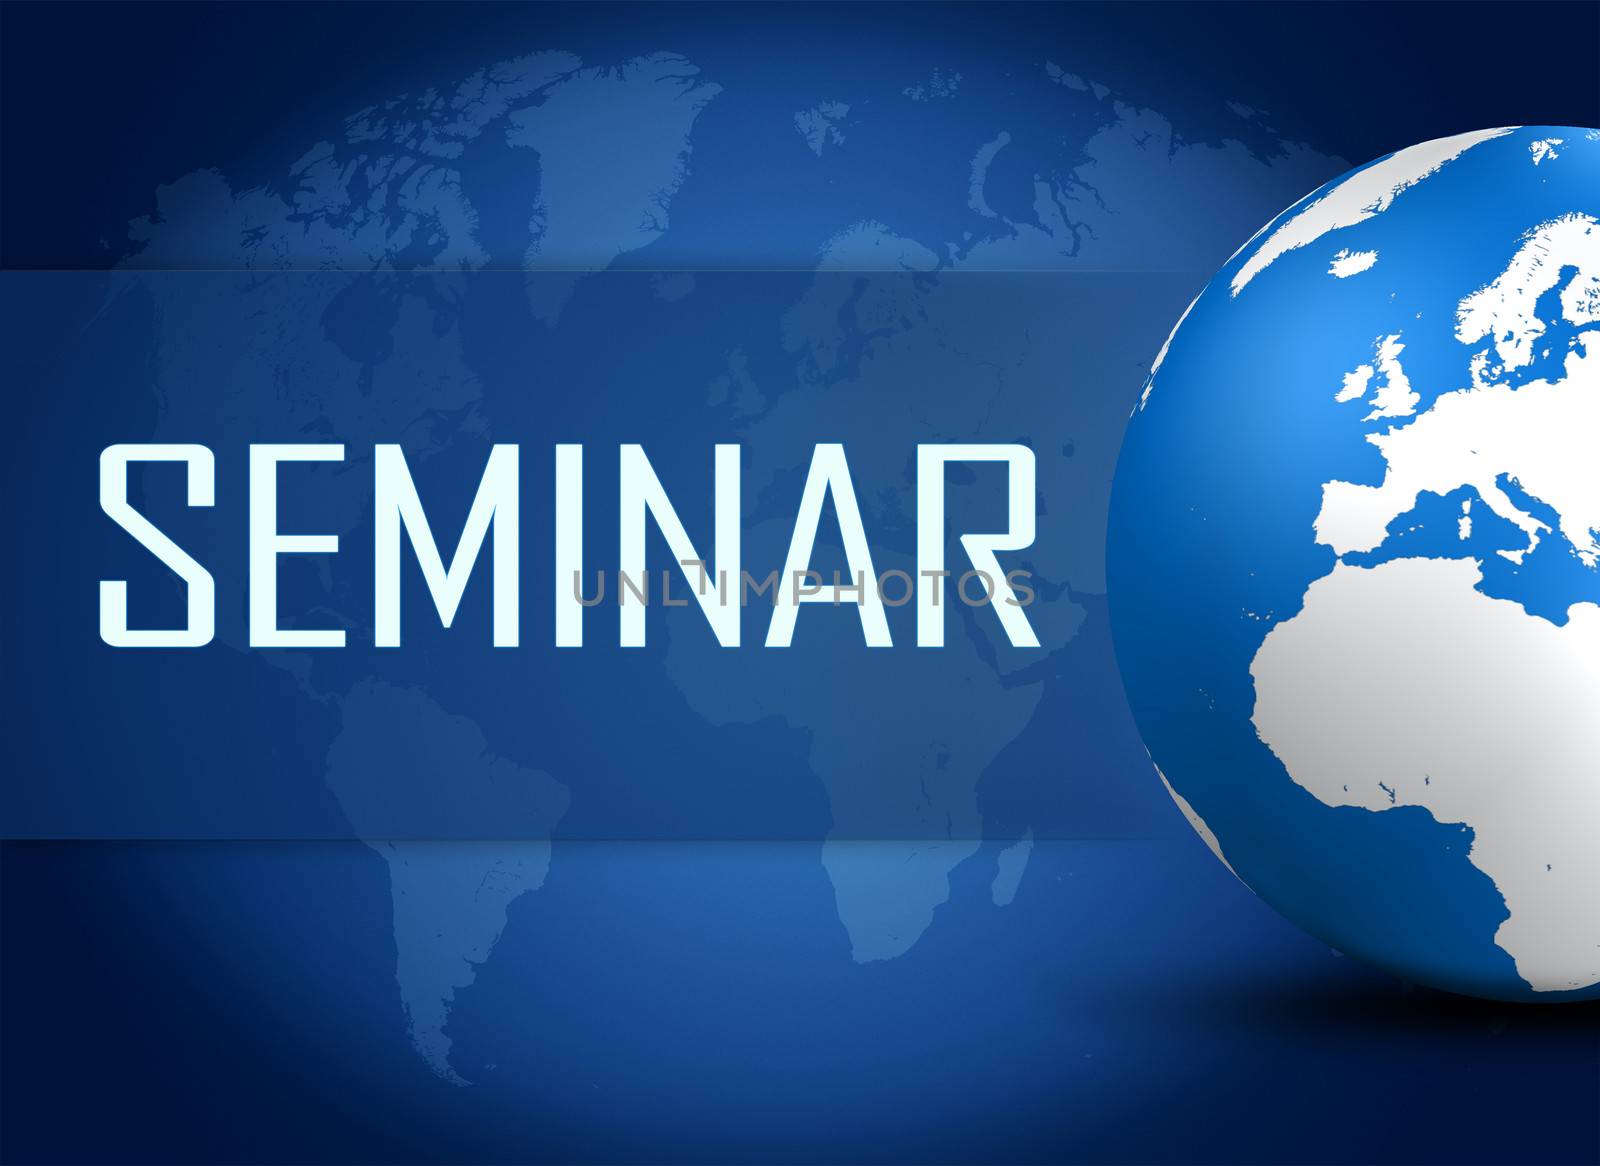 Seminar concept with world map on blue background